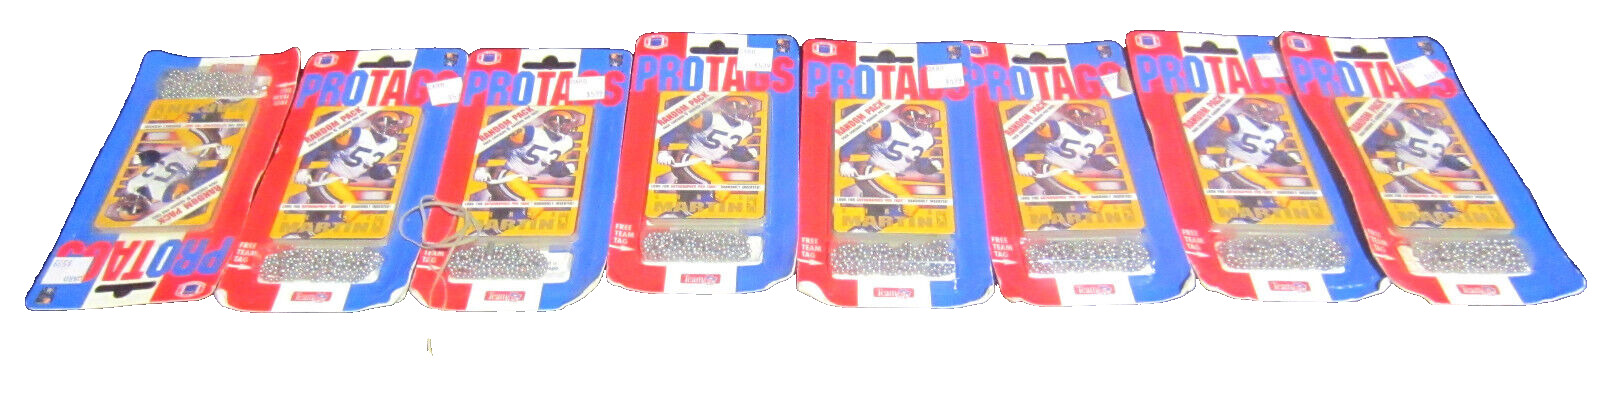 Lot of 8: NFL 1994 Pro Tags Random Packs of 6 Pro Tags Each – New/Sealed